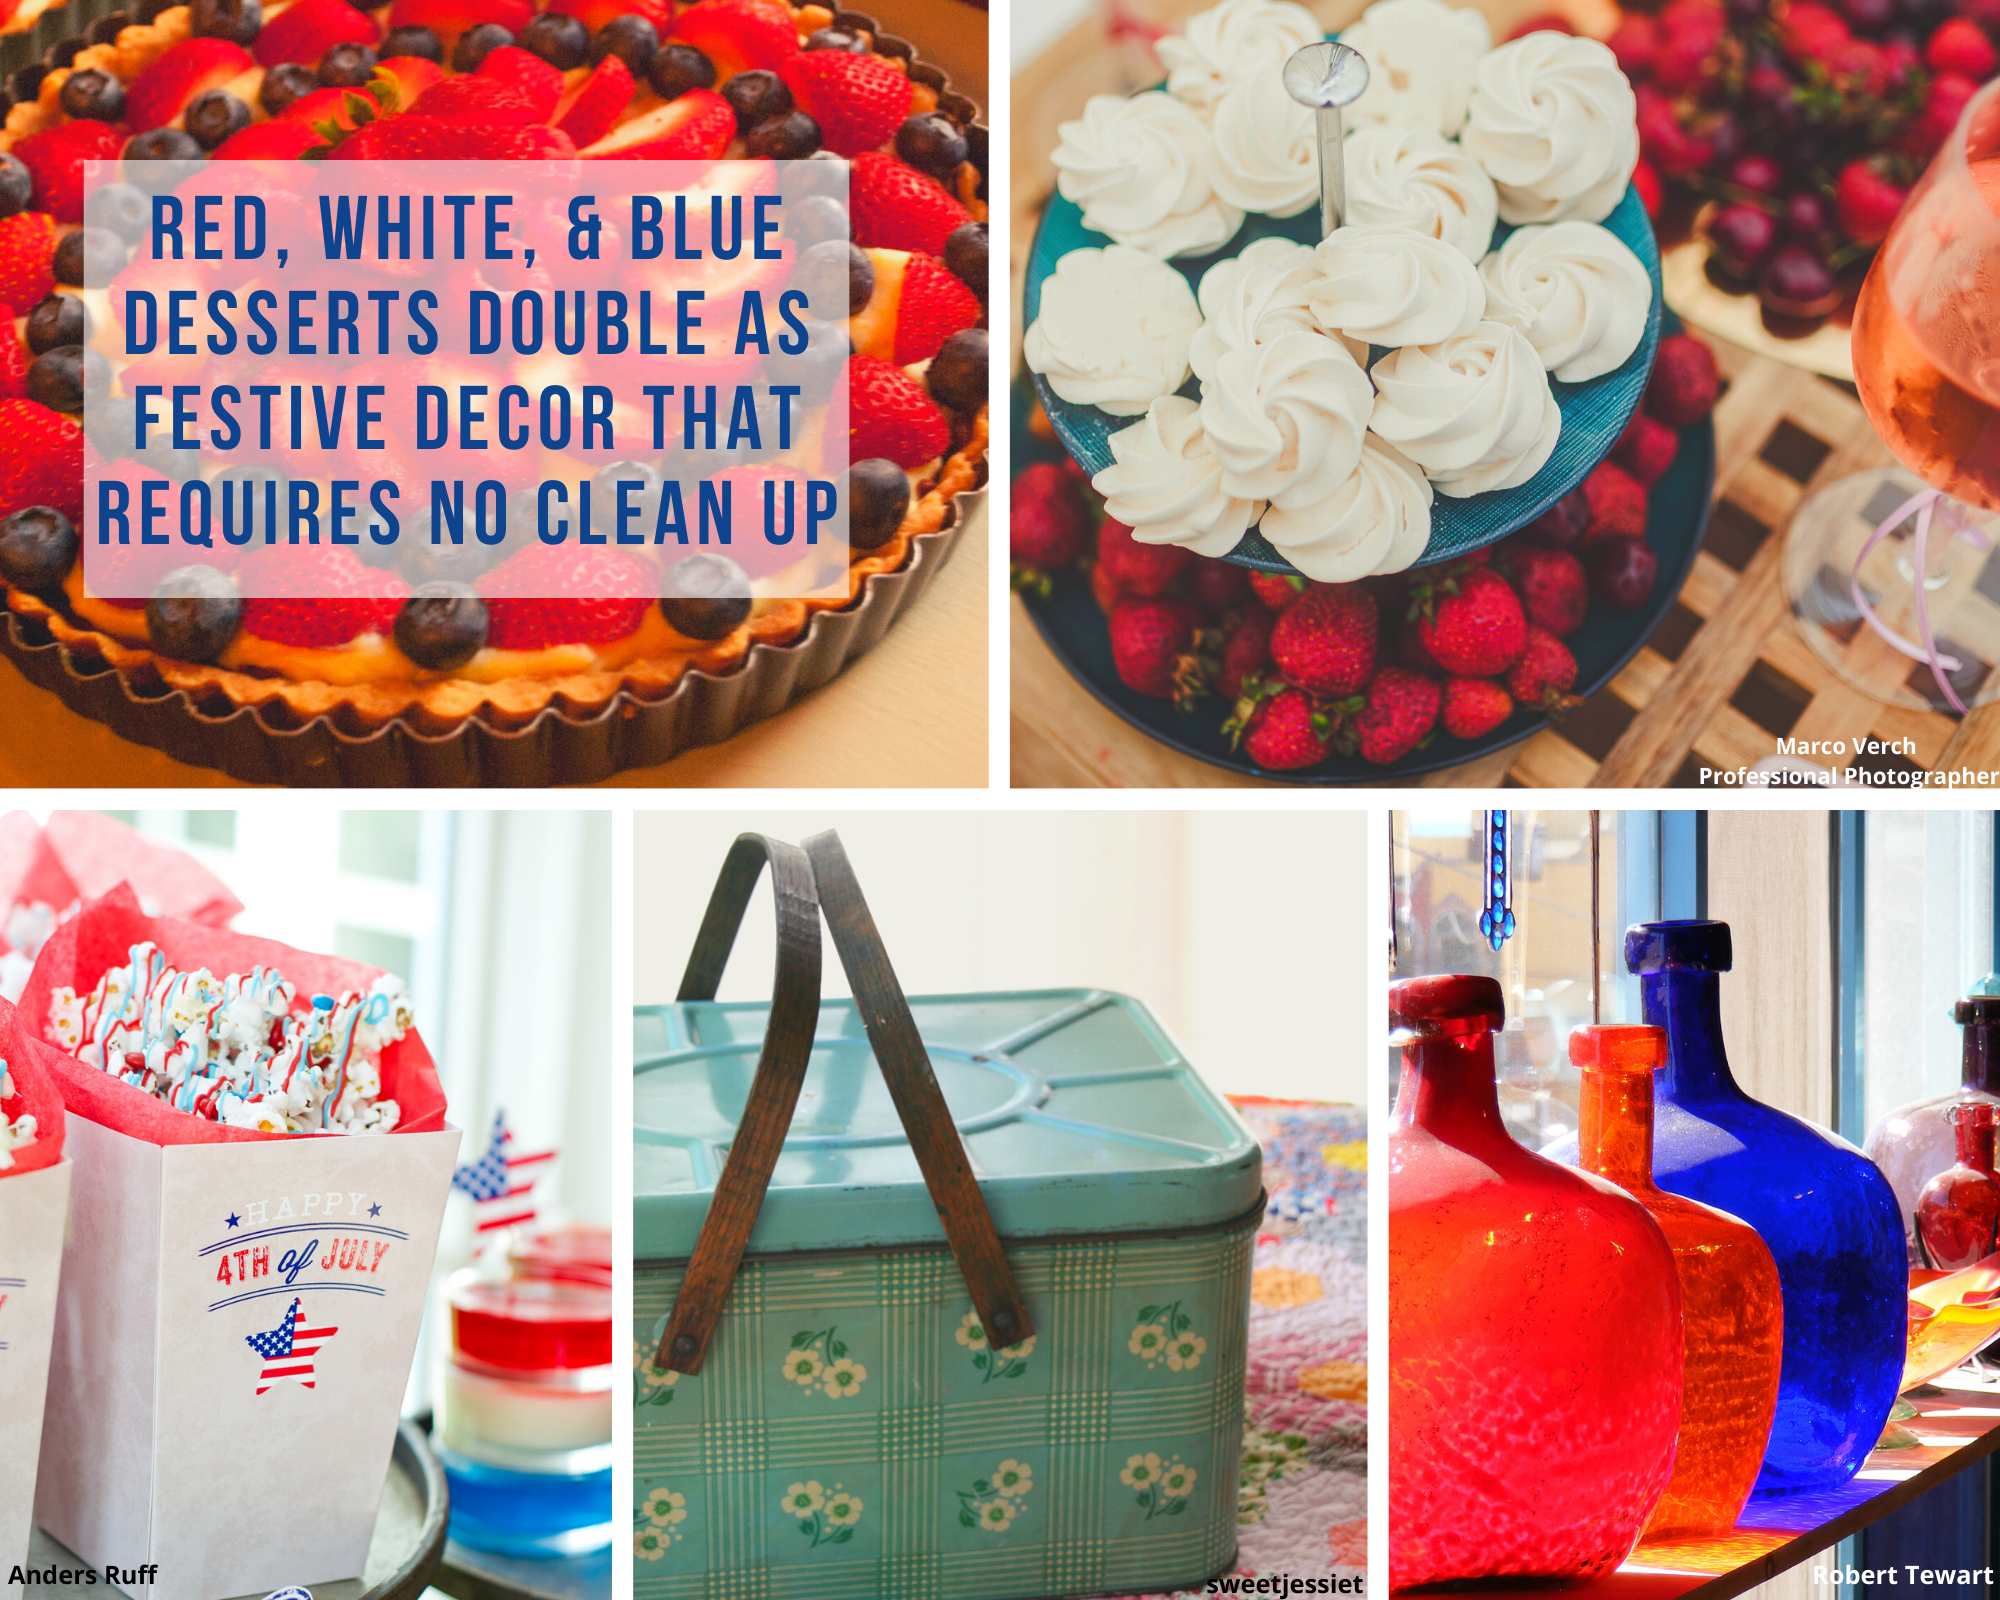 Photo collage of red, white, & blue deserts and serveware